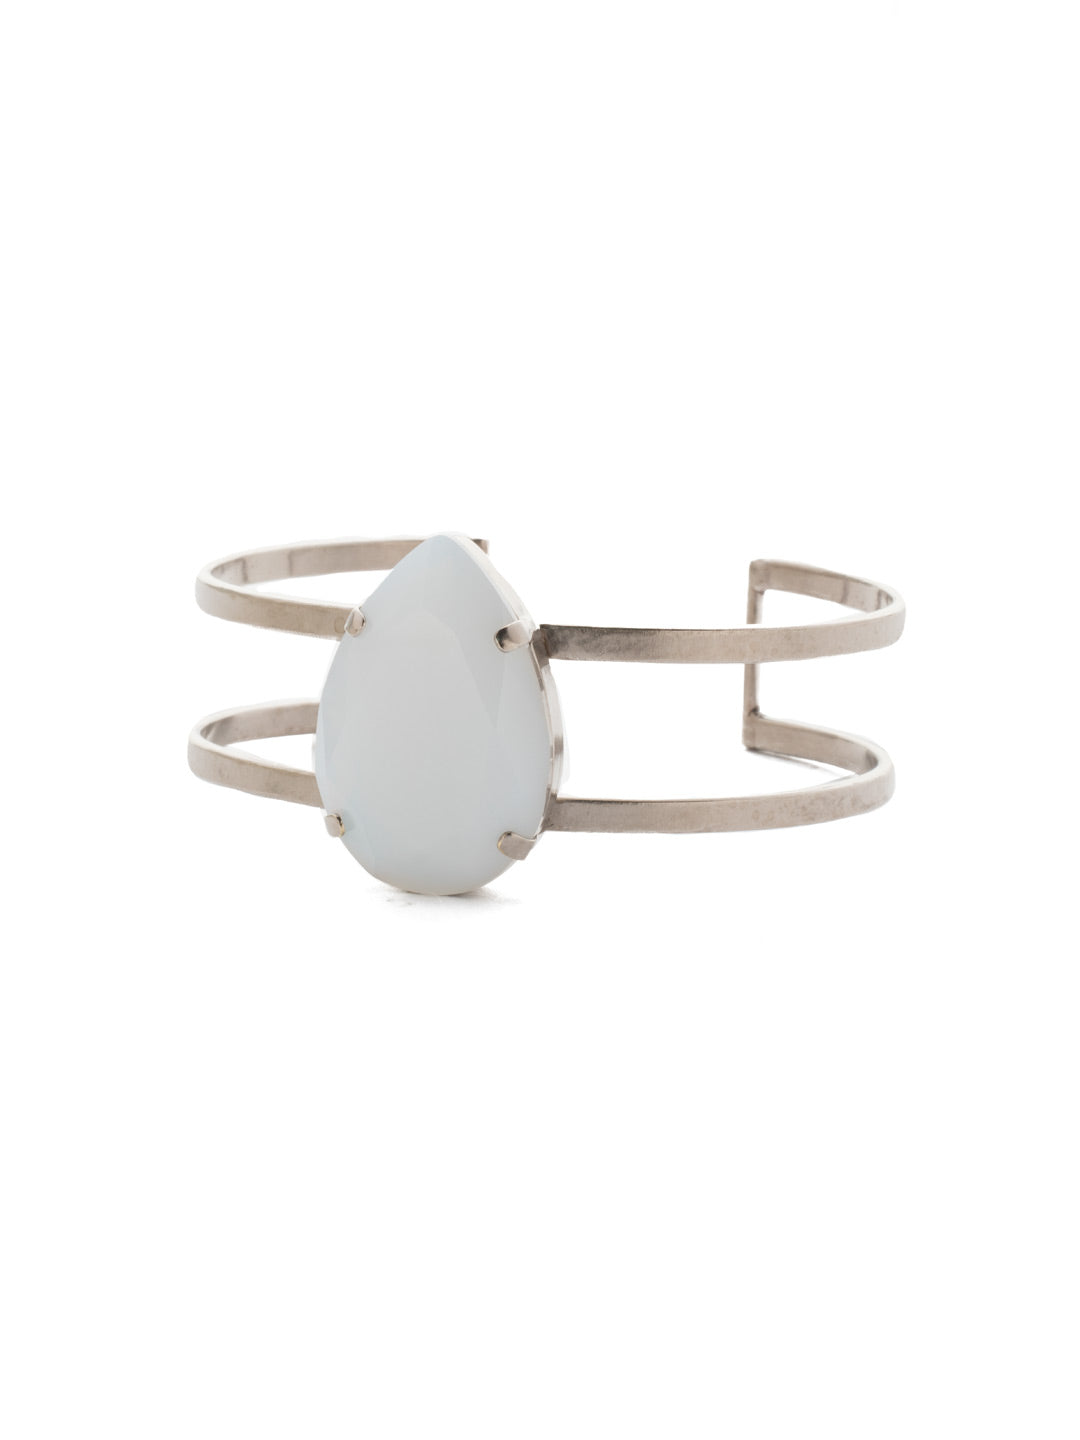 Ellaria Cuff Bracelet - BEF1ASSNM - This bracelet is adorned with a marbled stone cast in the middle of an iron cuff. This can be a perfect piece to go along with any daytime outfit and is a slip-on style. From Sorrelli's Snowy Moss collection in our Antique Silver-tone finish.